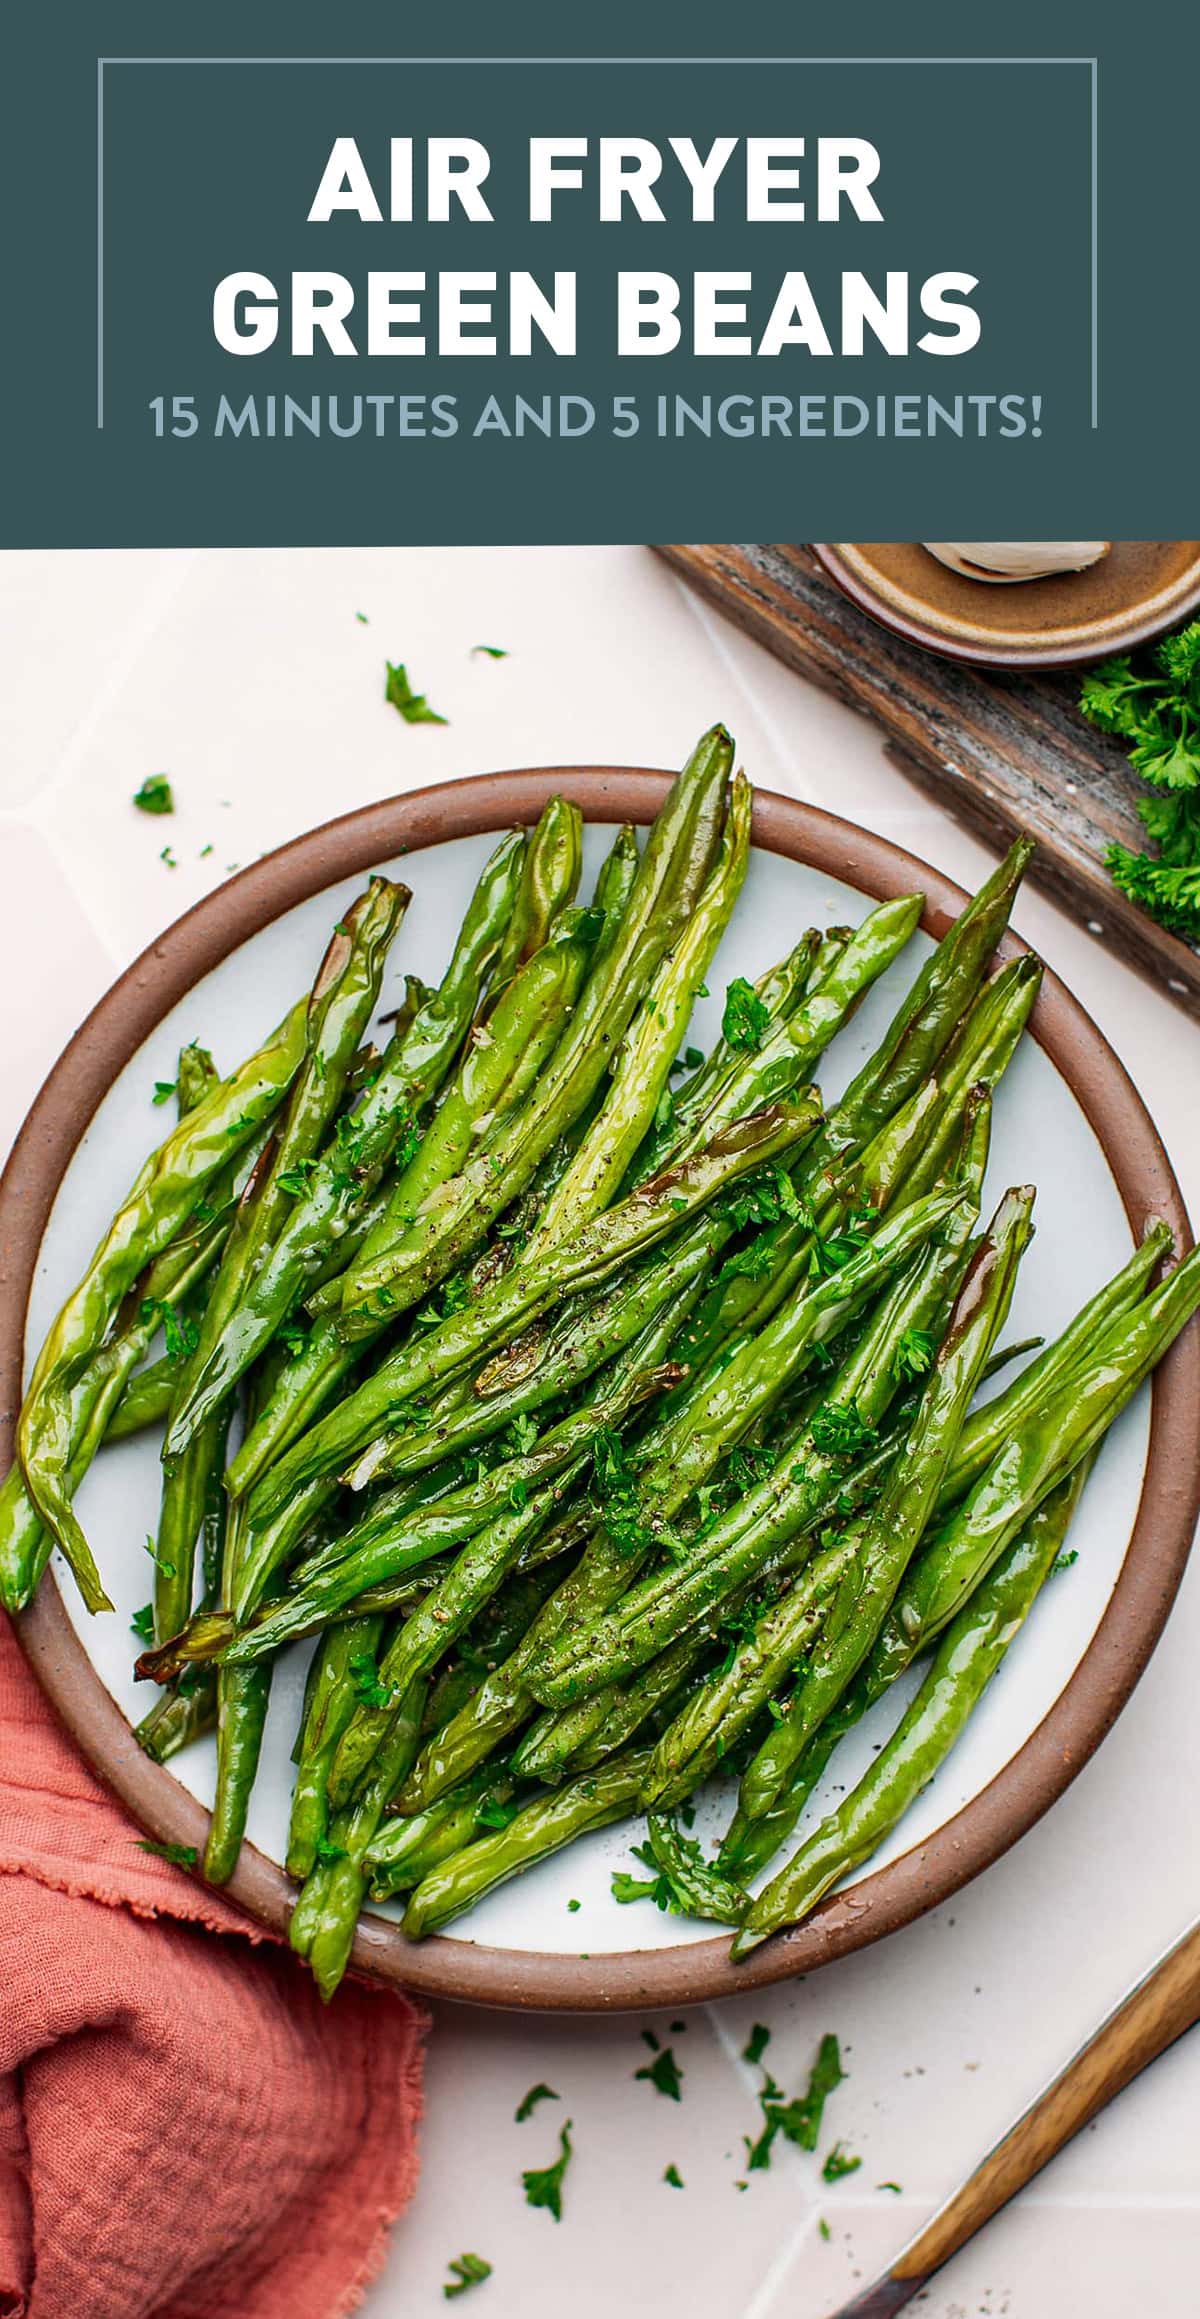 Looking for a quick 15-minute side dish? These air fryer green beans are tender, slightly crispy, and loaded with garlic. Made entirely in the air fryer with just 5 ingredients, this healthy side dish pairs well with any meal! #airfryer #greenbeans